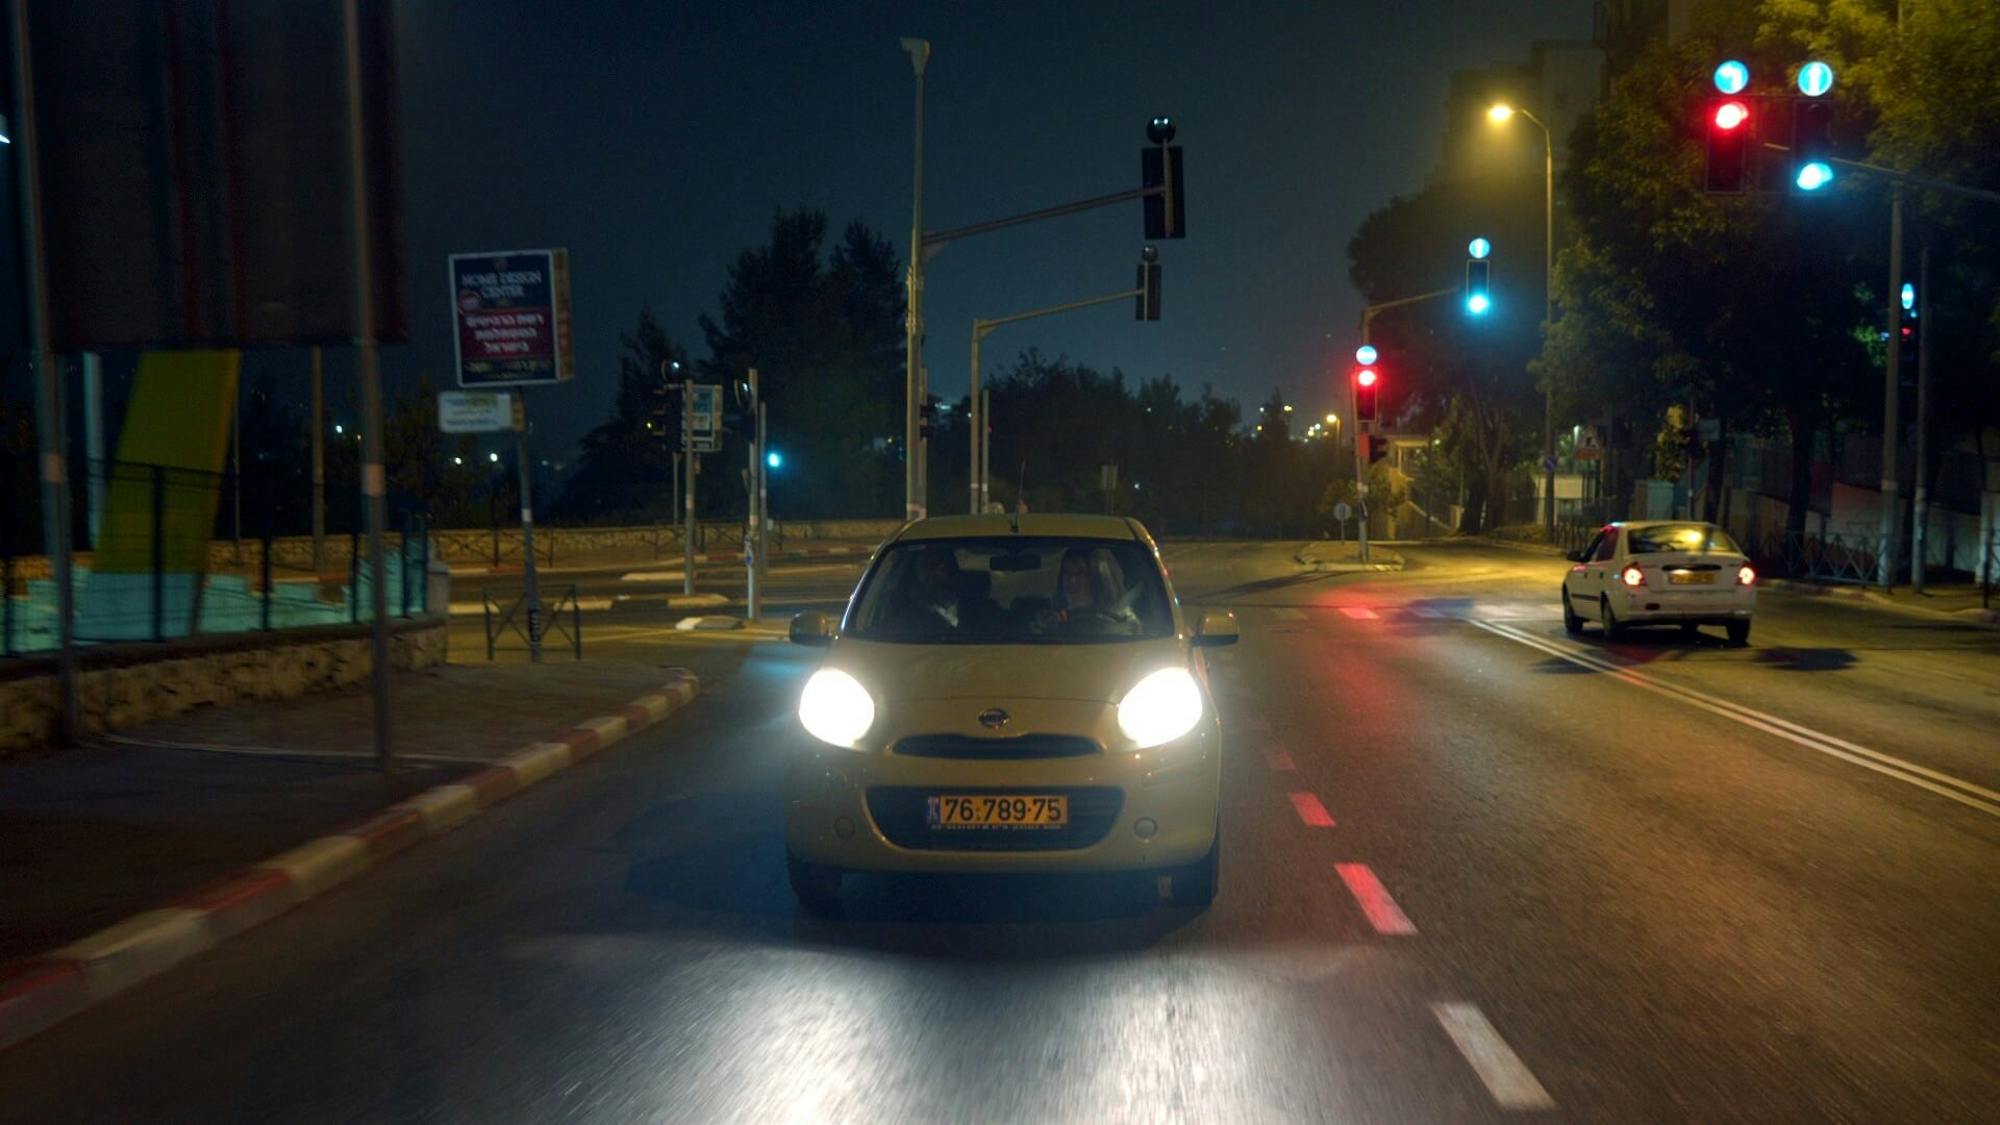 A shot of a white car on a street. The headlights are on. It is nighttime and there is one other car on this empty street.